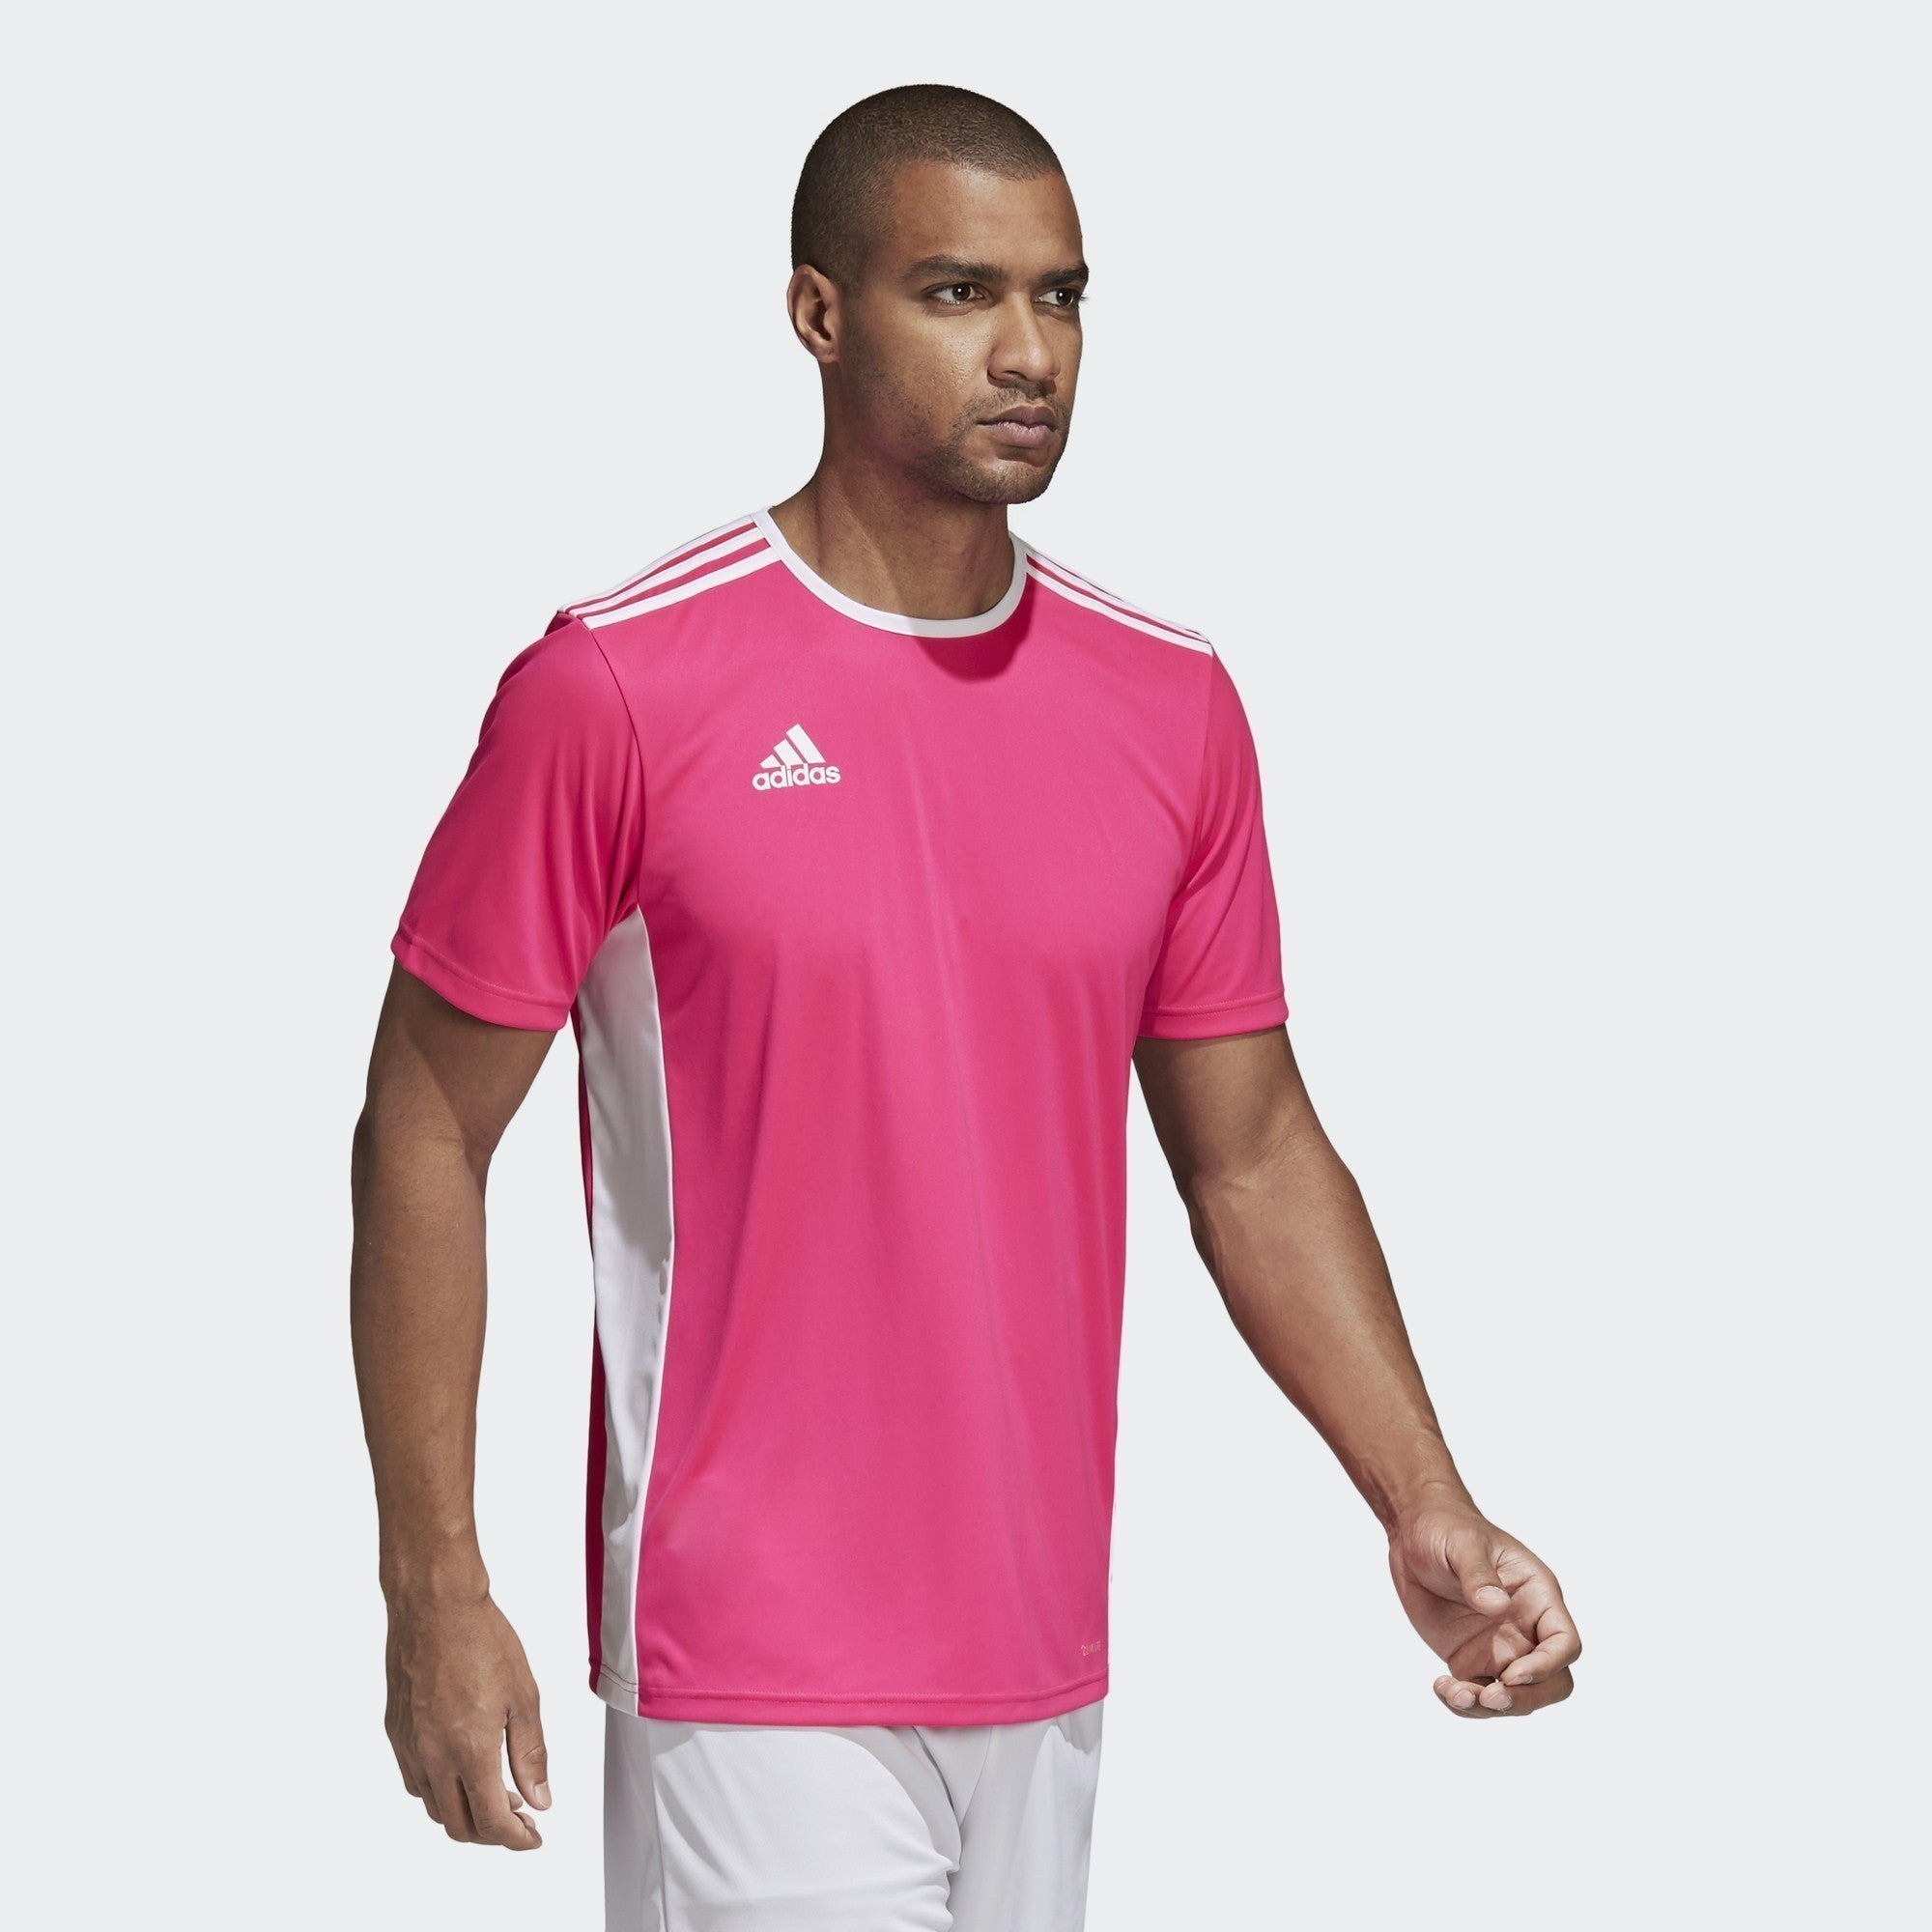 Adidas Men's Soccer Entrada 18 Jersey Adidas - Ships Directly From